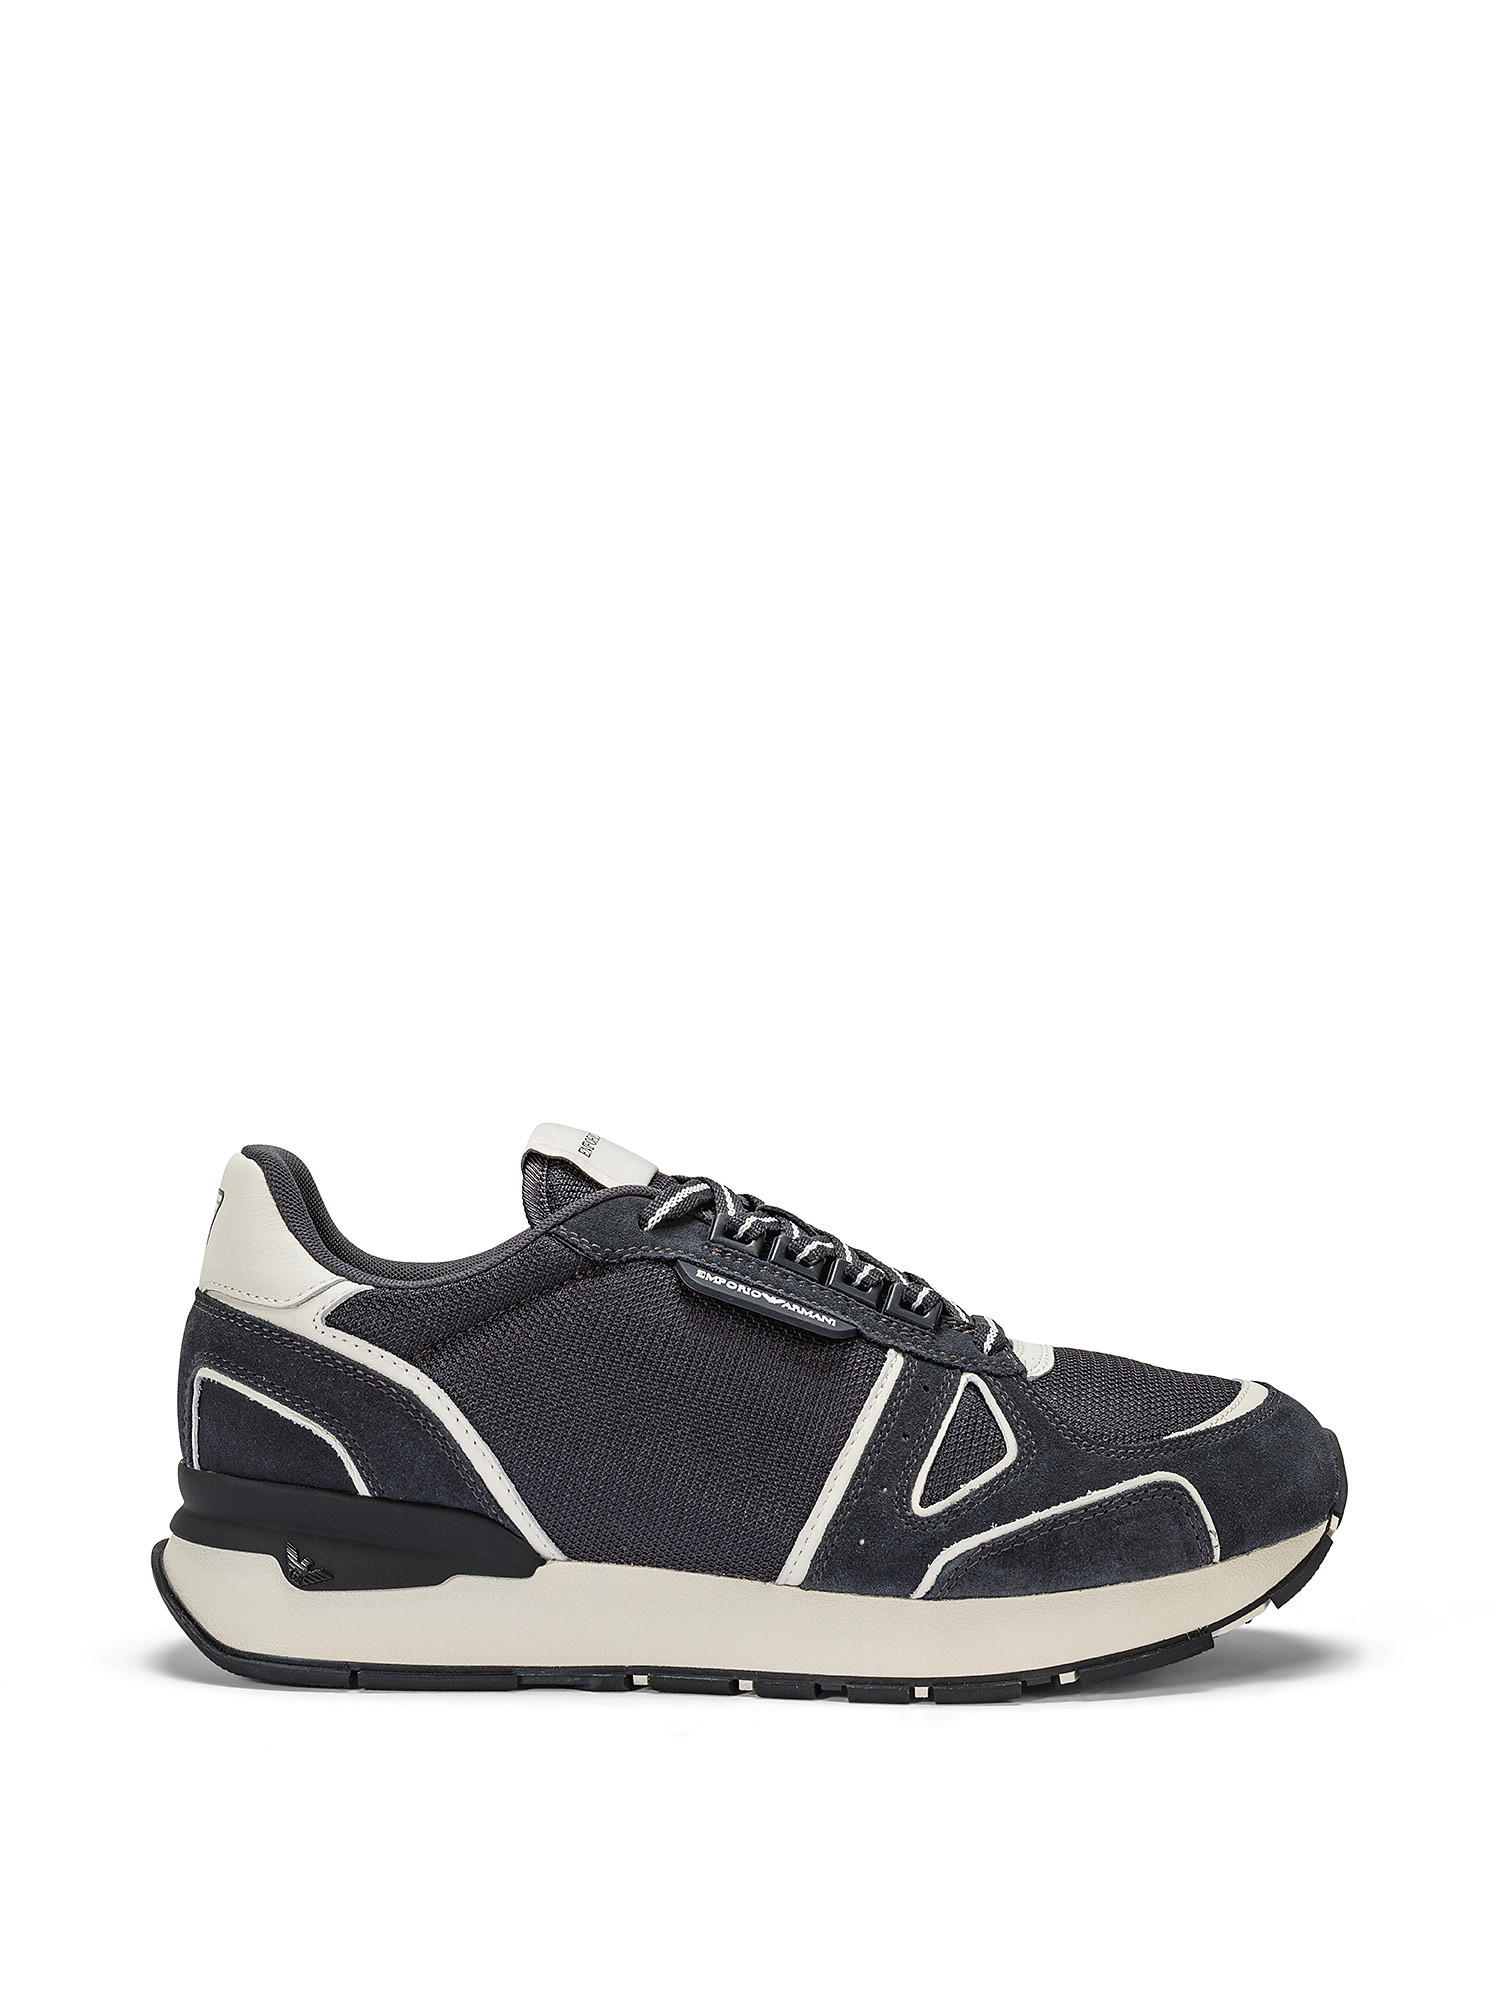 Emporio Armani - Sneakers with suede inserts, Dark Blue, large image number 0